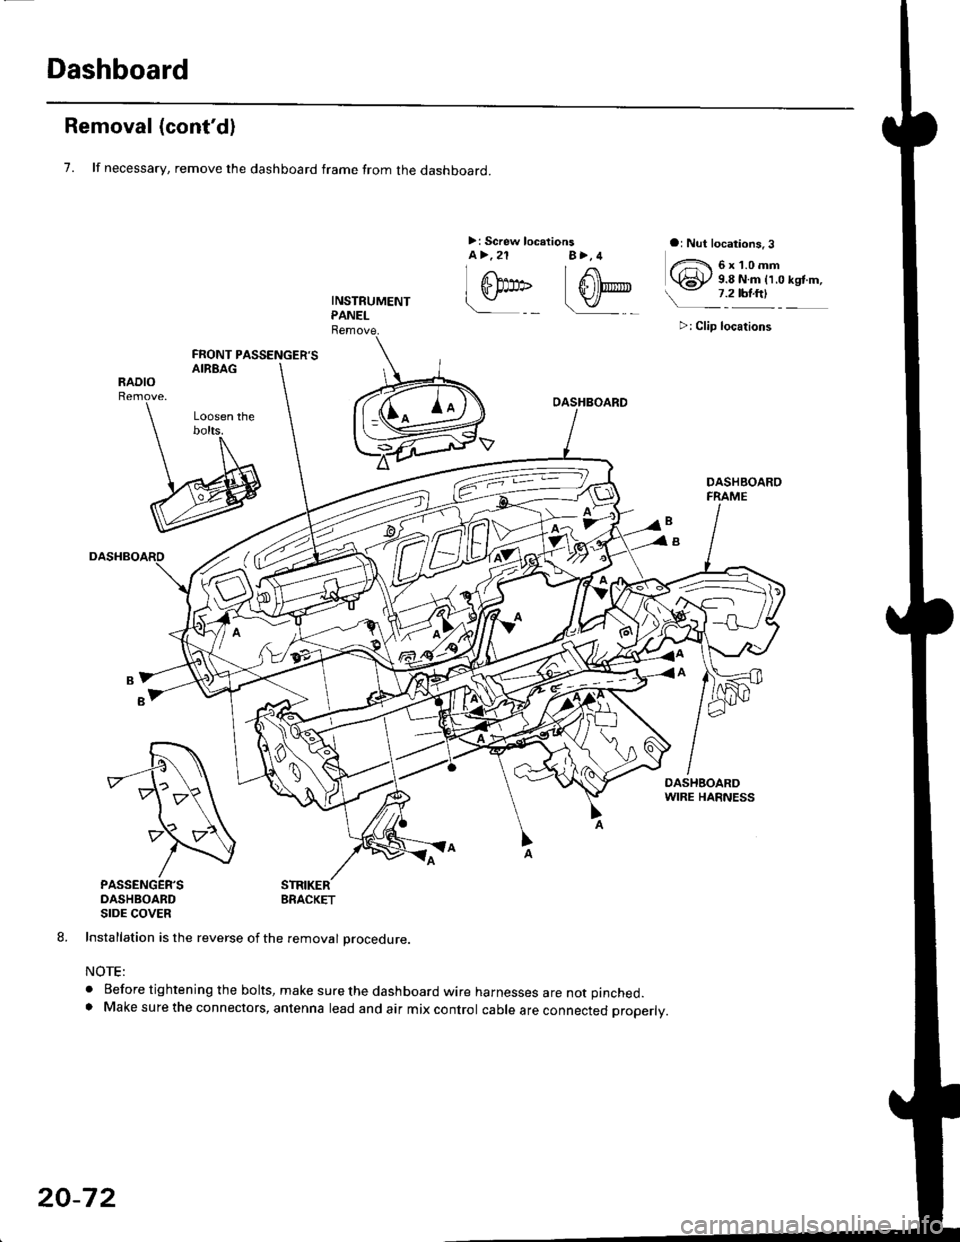 HONDA CIVIC 1996 6.G Workshop Manual Dashboard
Removal (contd)
7. lf necessary, remove the dashboard frame from the dashboard.
>: Screw localionsa>,21 B>,4a: Nut locations, 3
>: Clip locations
l^1./\
I Shl: OlbtvY/l\-]1
ra 6 x 1.0 m